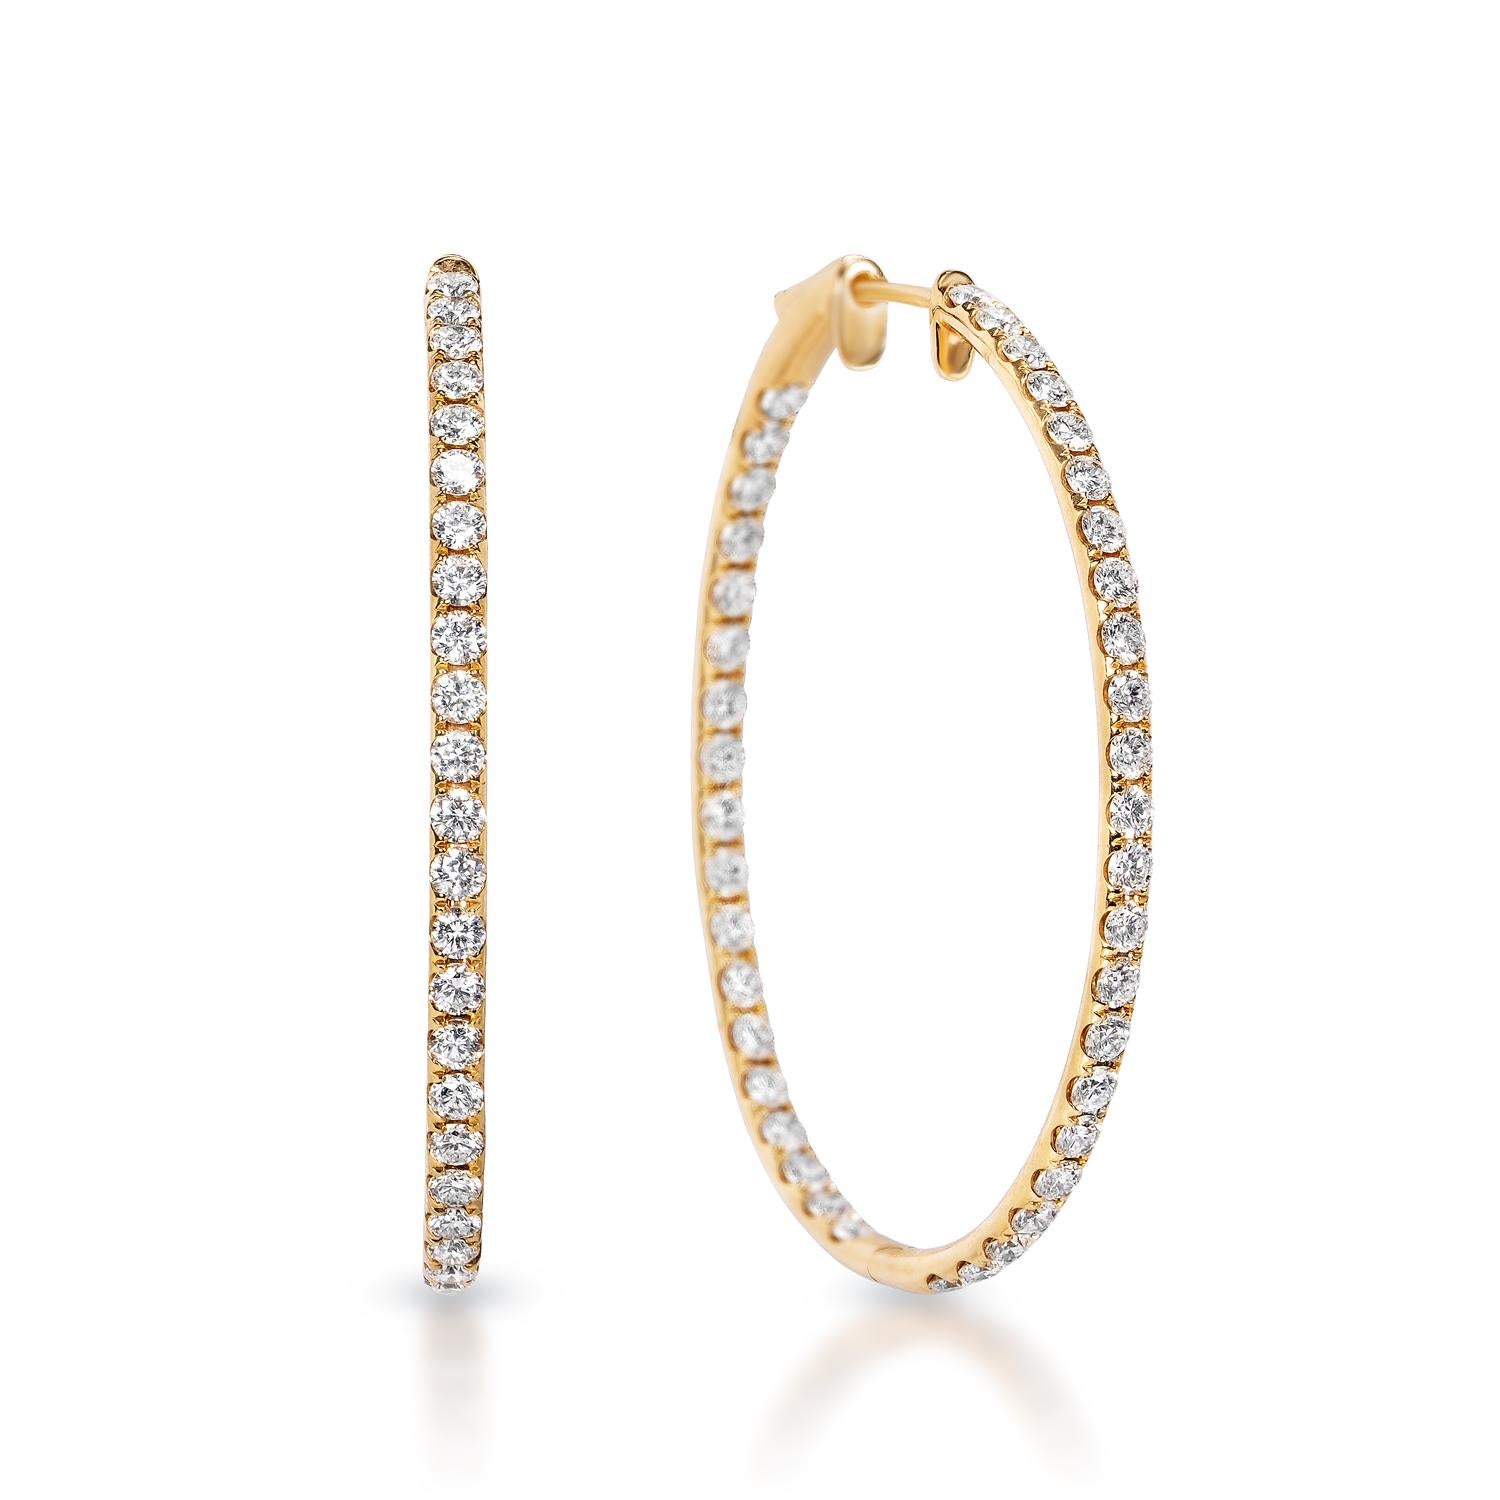 Oval Diamond Hoop Earrings 


1.50 inches long  x 1.25 inches wide

Carat Weight: 2.80 Carats
Shape: Round Brilliant Cut
Metal: 14 Karat Yellow Gold
Style: Hoop Earrings